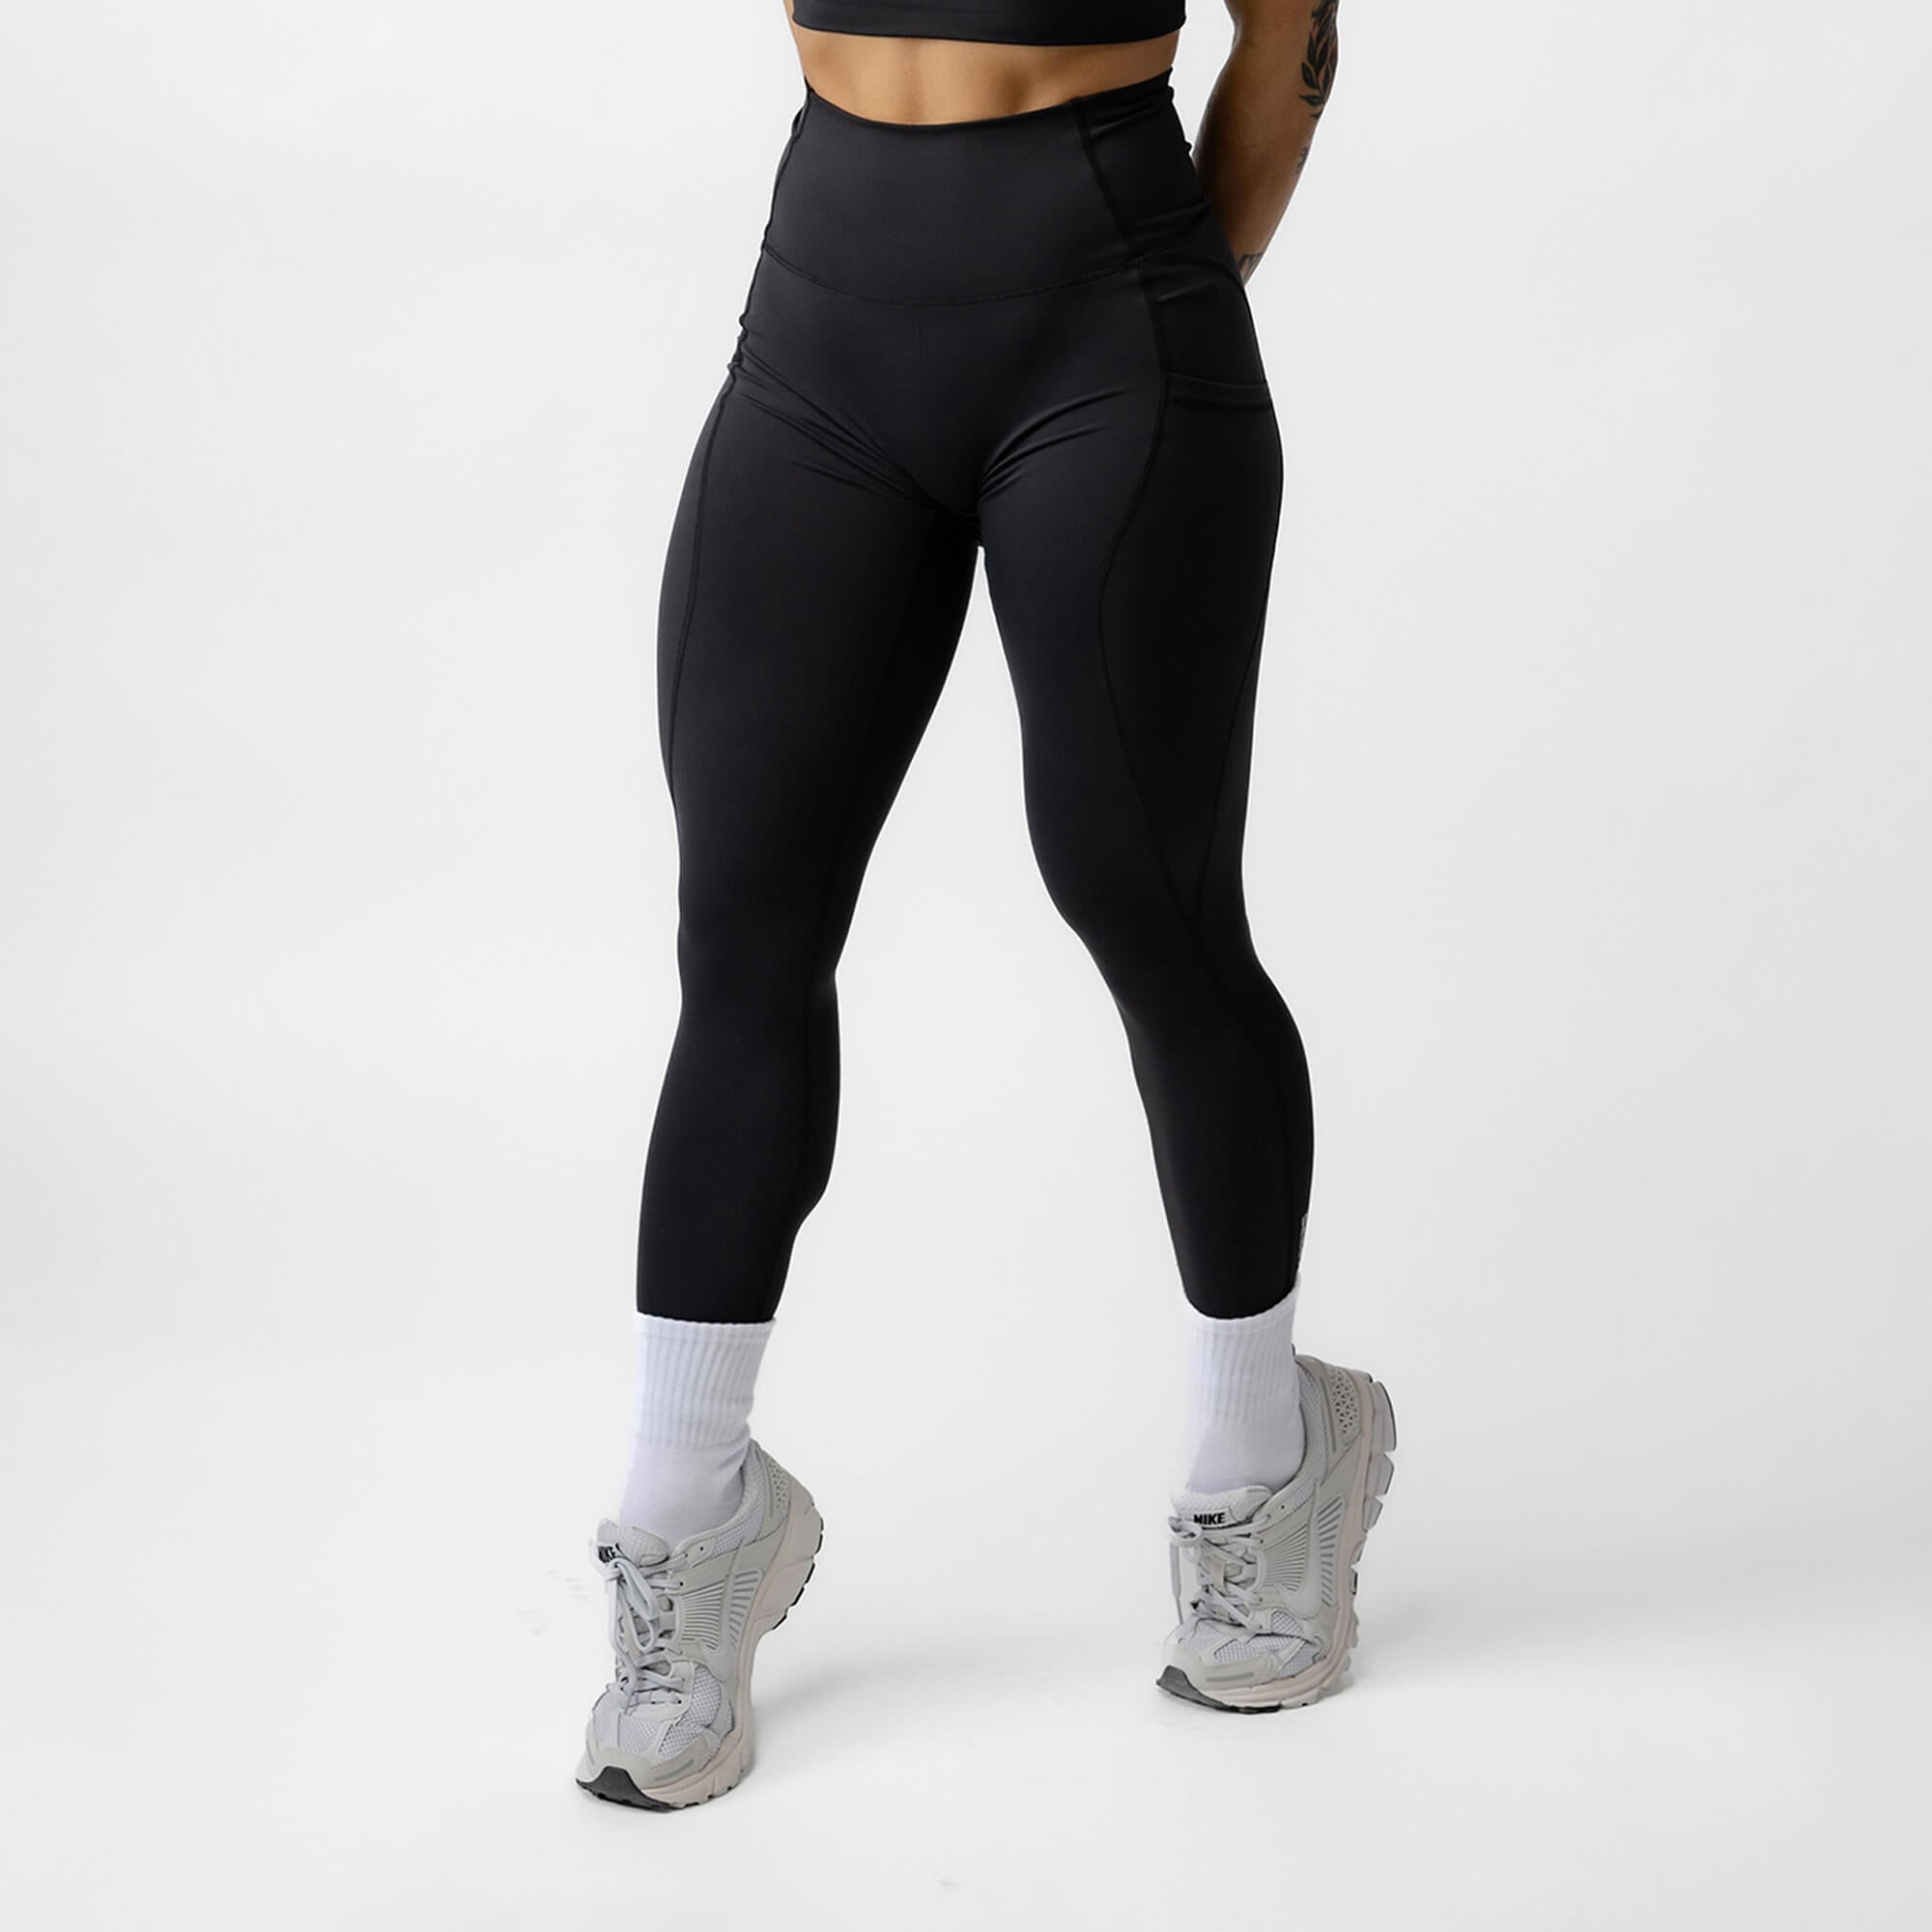 The ankle leggings  High resistance fabric for your workouts